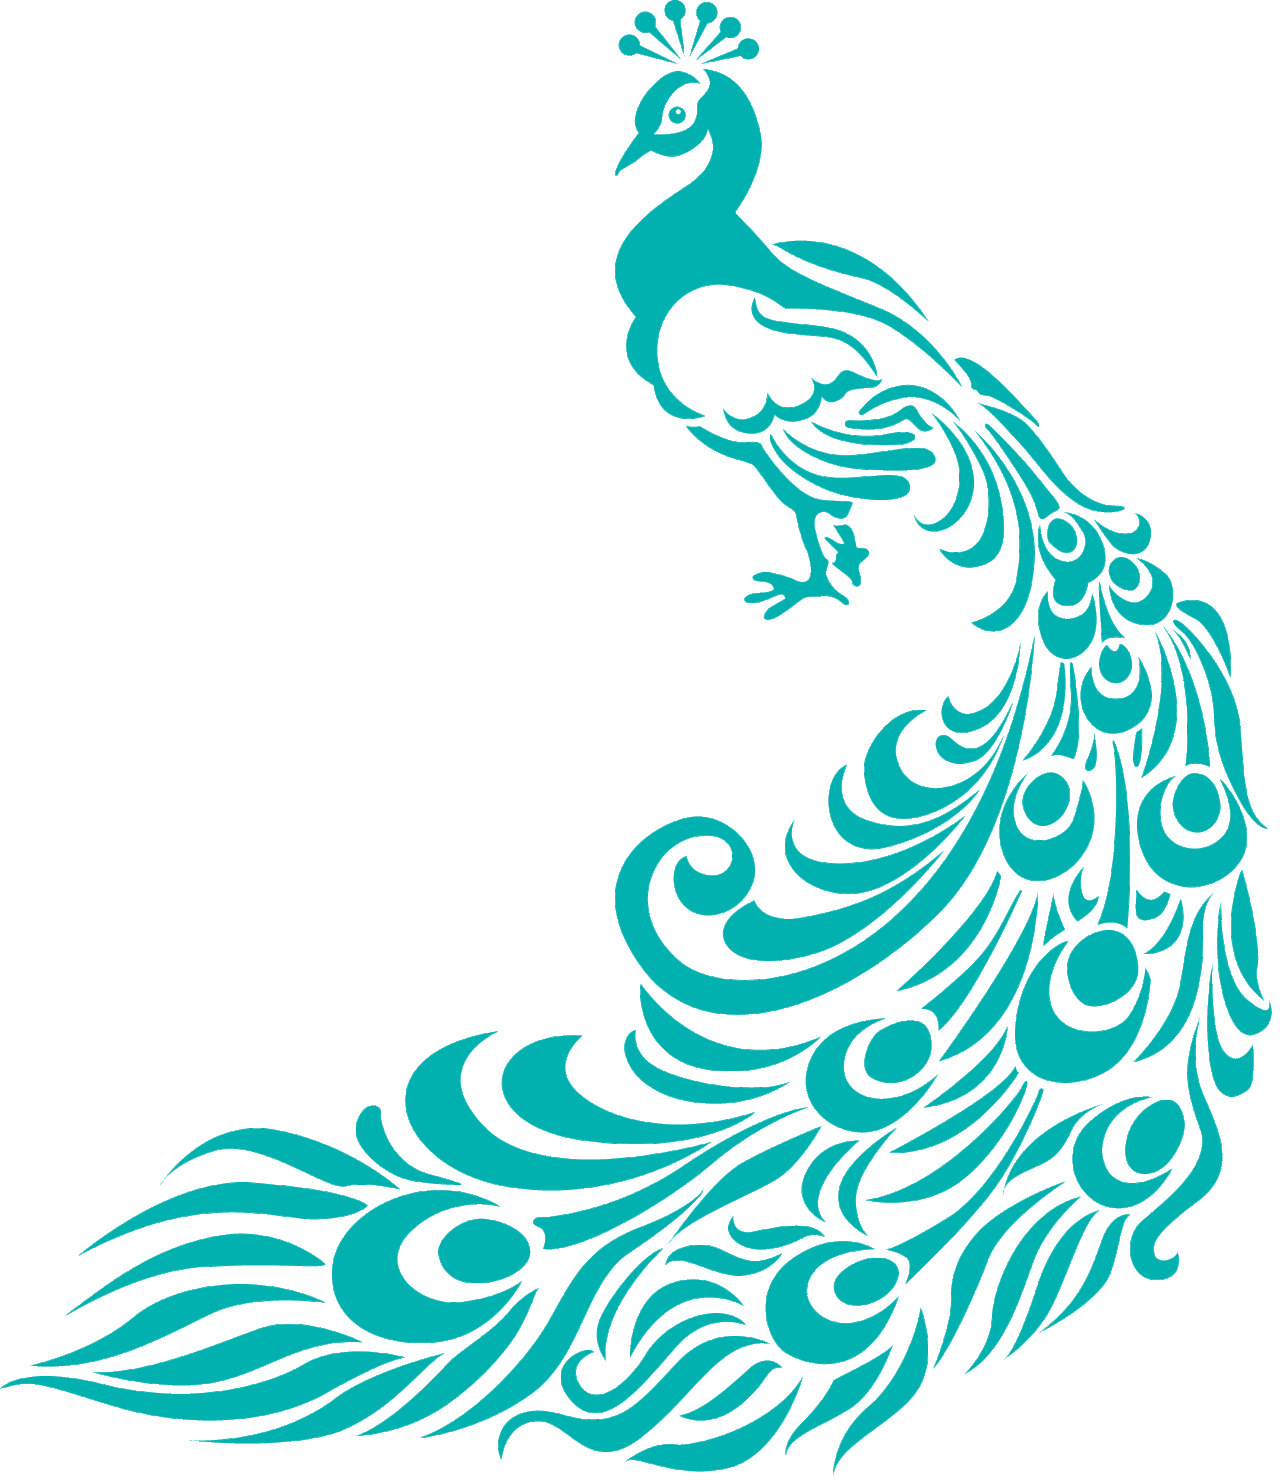 feathers clipart paisley peacock